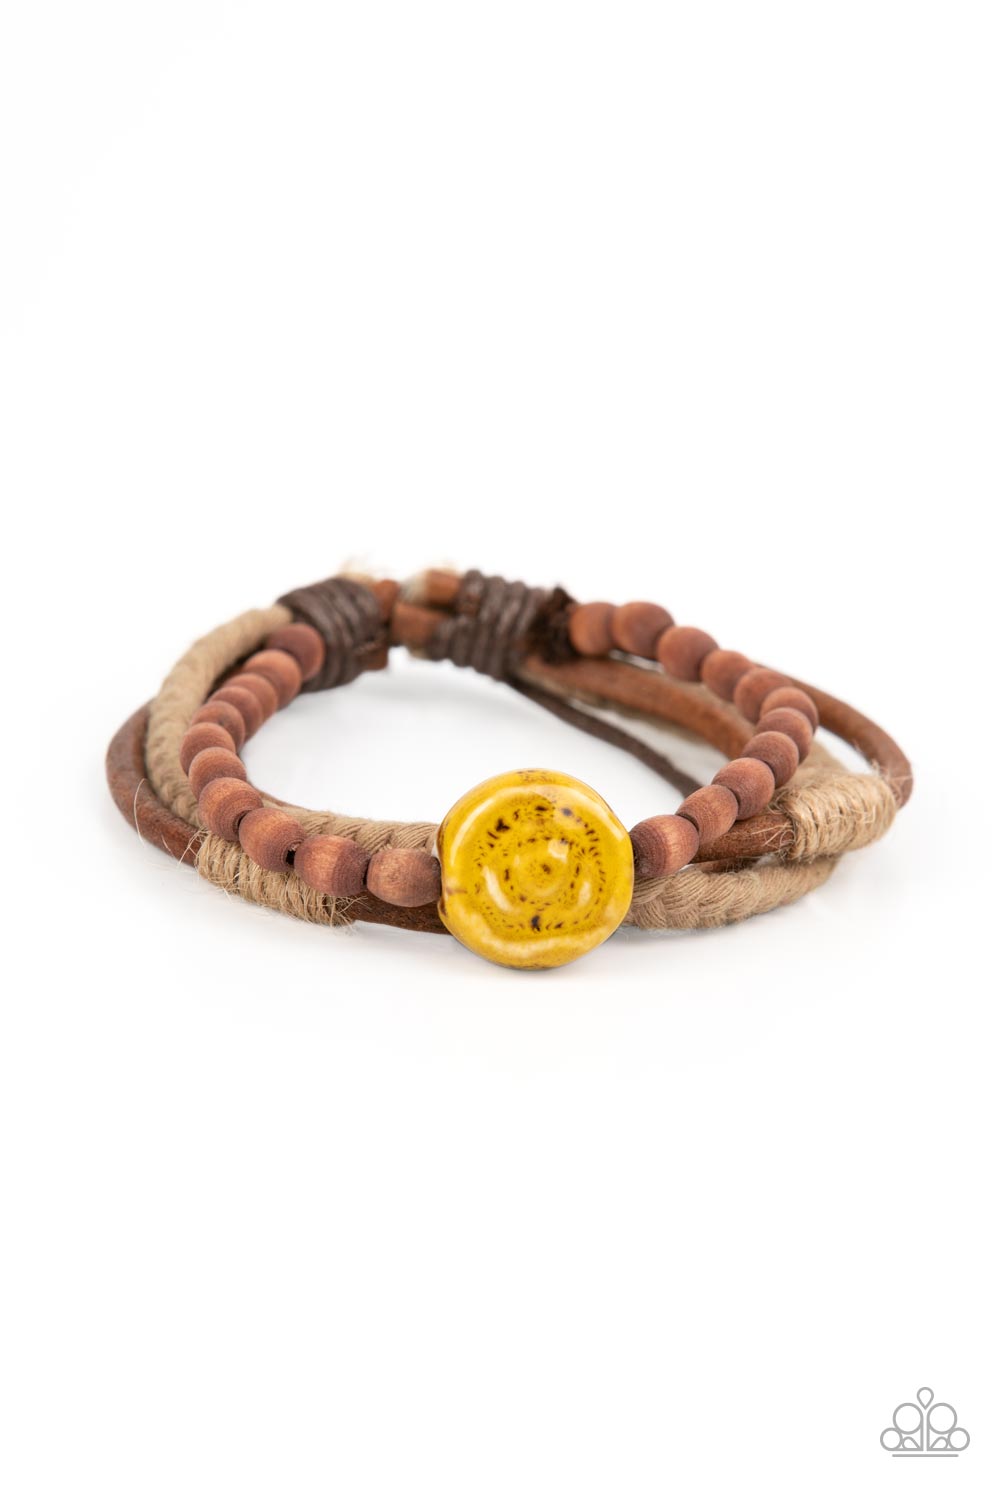 Existential Earth Child Yellow Bracelet